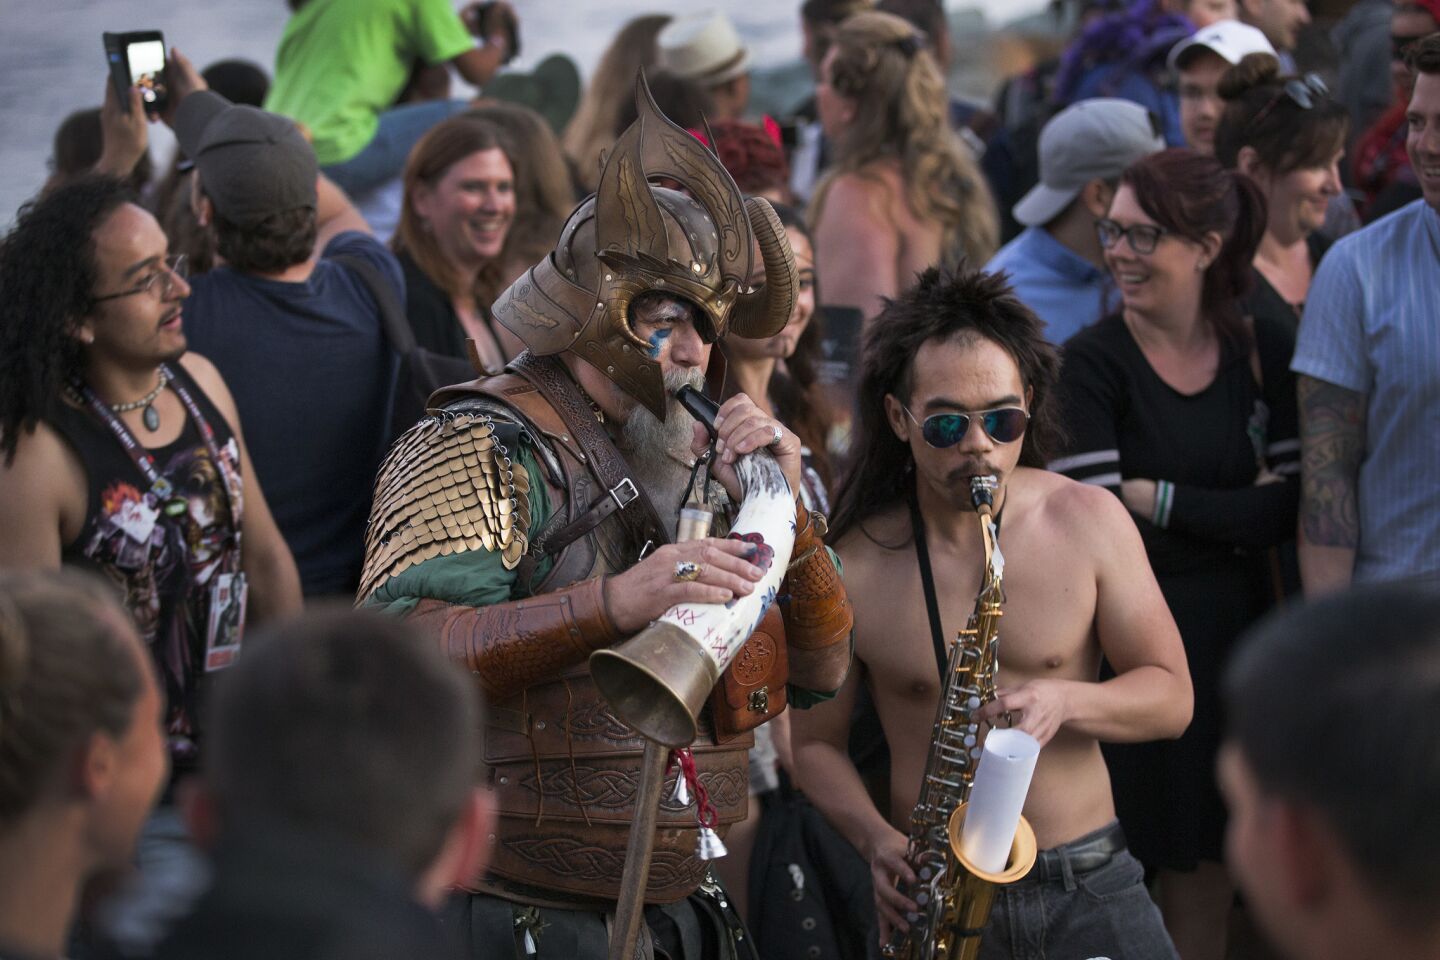 A costumed man blows a Viking horn, accompanied by another man playing the saxophone, at an event promoting the History Channel series "Vikings."